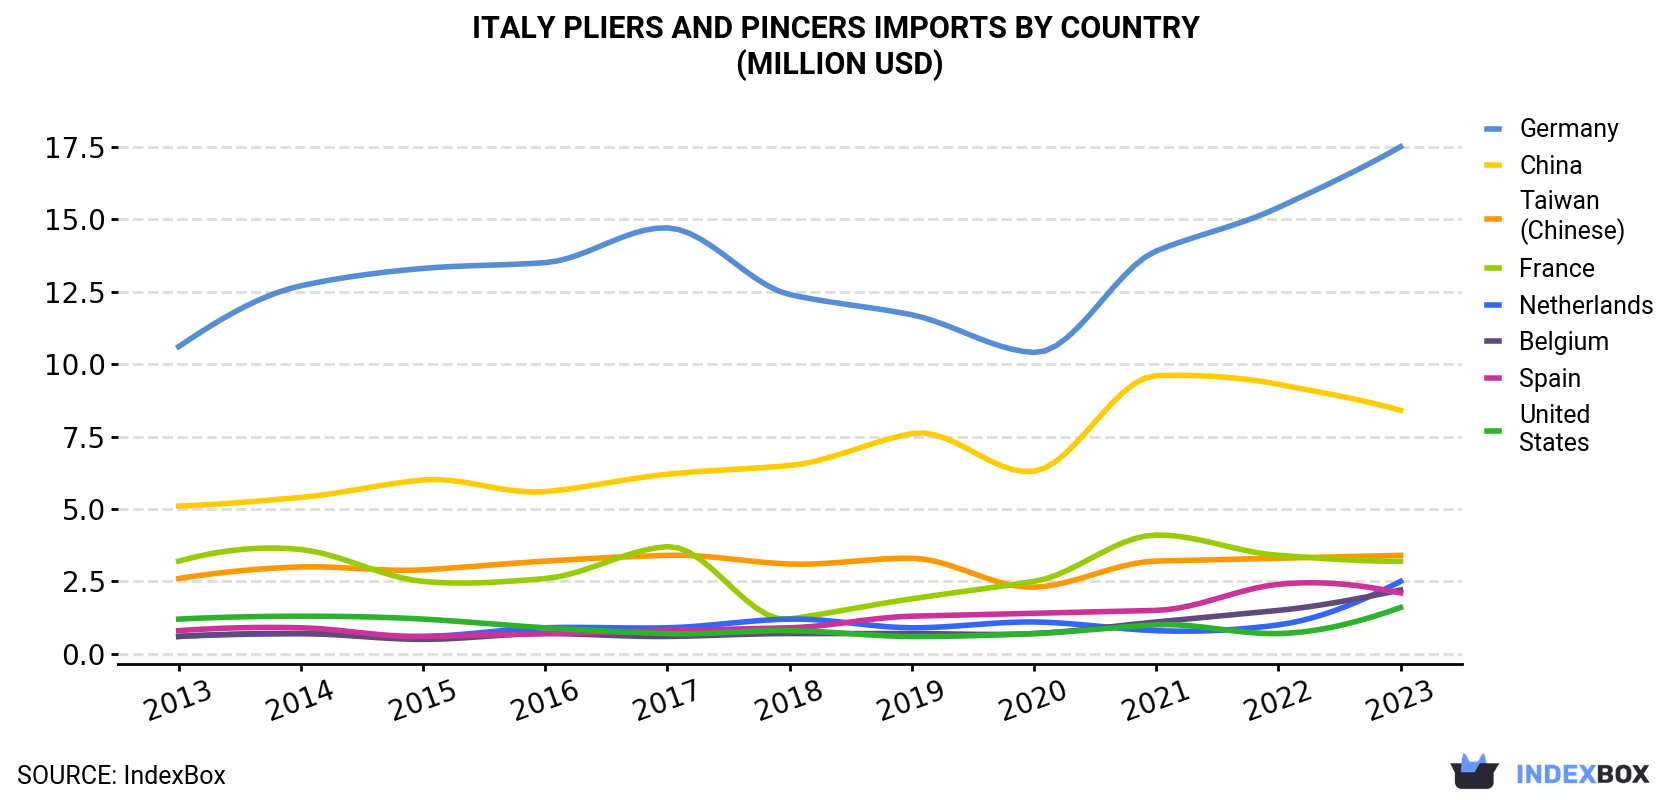 Italy Pliers And Pincers Imports By Country (Million USD)